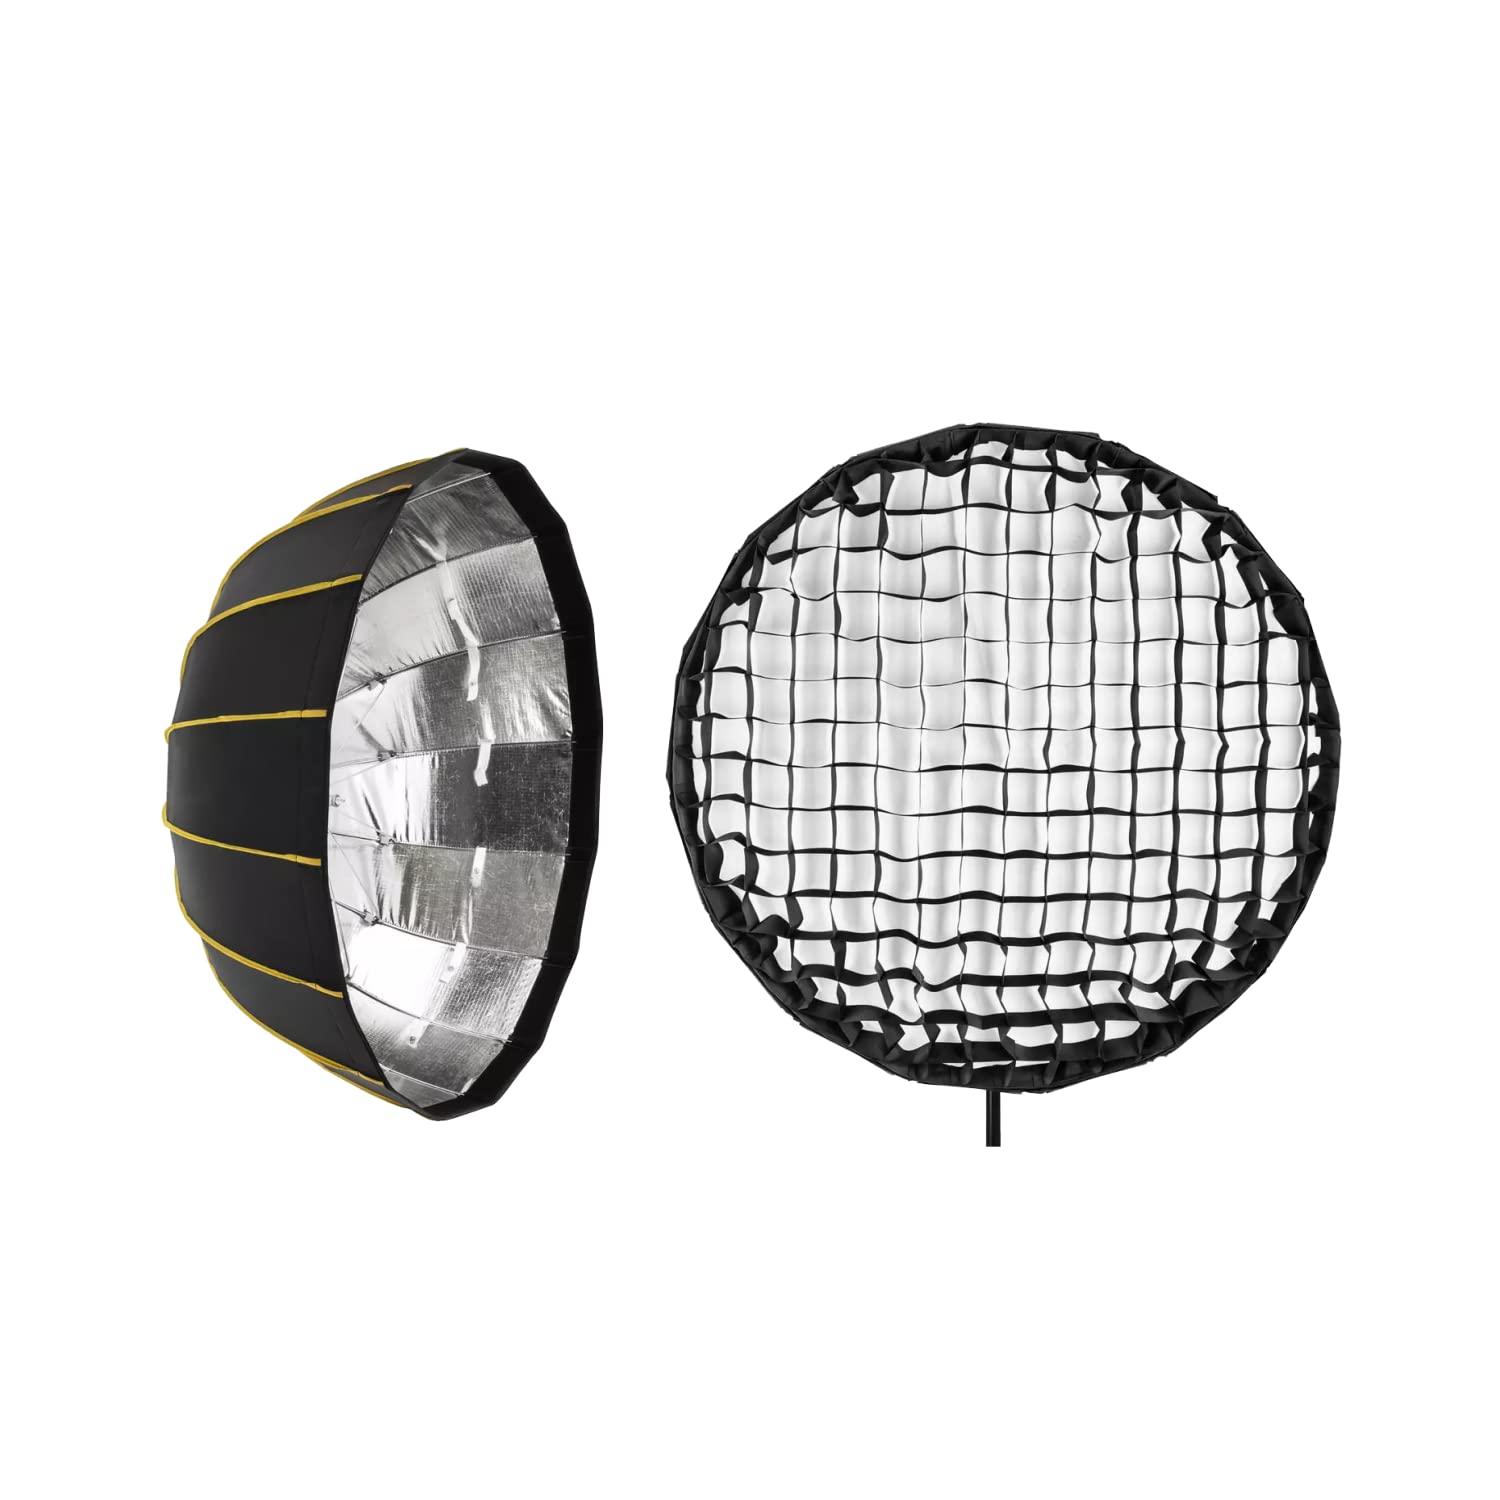 Digitek (DBDS-105S)105cm Beauty Dish Softbox DBDS-105S, Collapsible, Transportable, Lightweight Bowen Mount for Photography & Studio Lighting with Removable Diffuser - Digitek